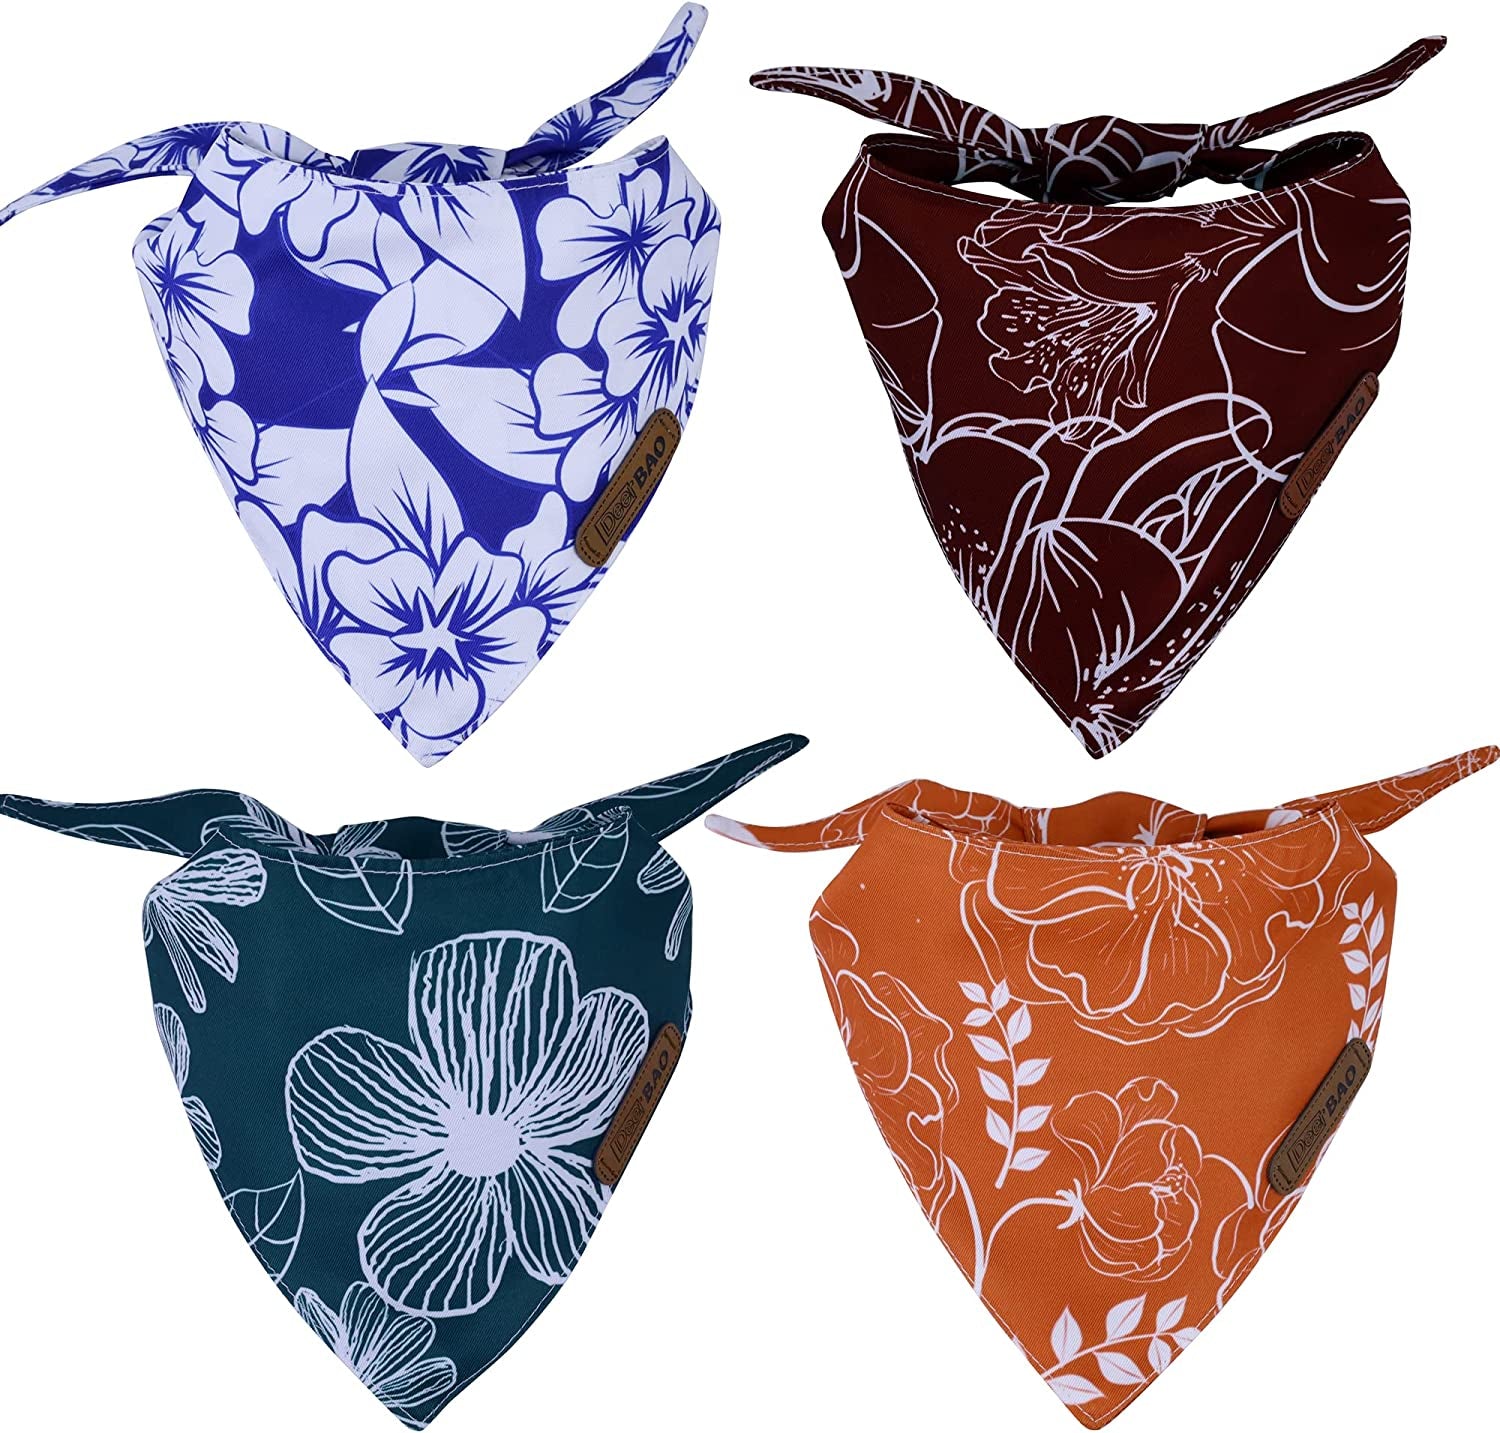 Deerbao Dog Bandanas 4Pack,Dog Scarf,Dog Bandanas Boygirl,Premium Durable Fabric,Adjustable Fit,Unique Shape,Suitable for All Kinds of Dogs,Provide Various Sizes (Large, Classic Plaid) Animals & Pet Supplies > Pet Supplies > Dog Supplies > Dog Apparel DeerBAO Hand Painted Flowers Large 